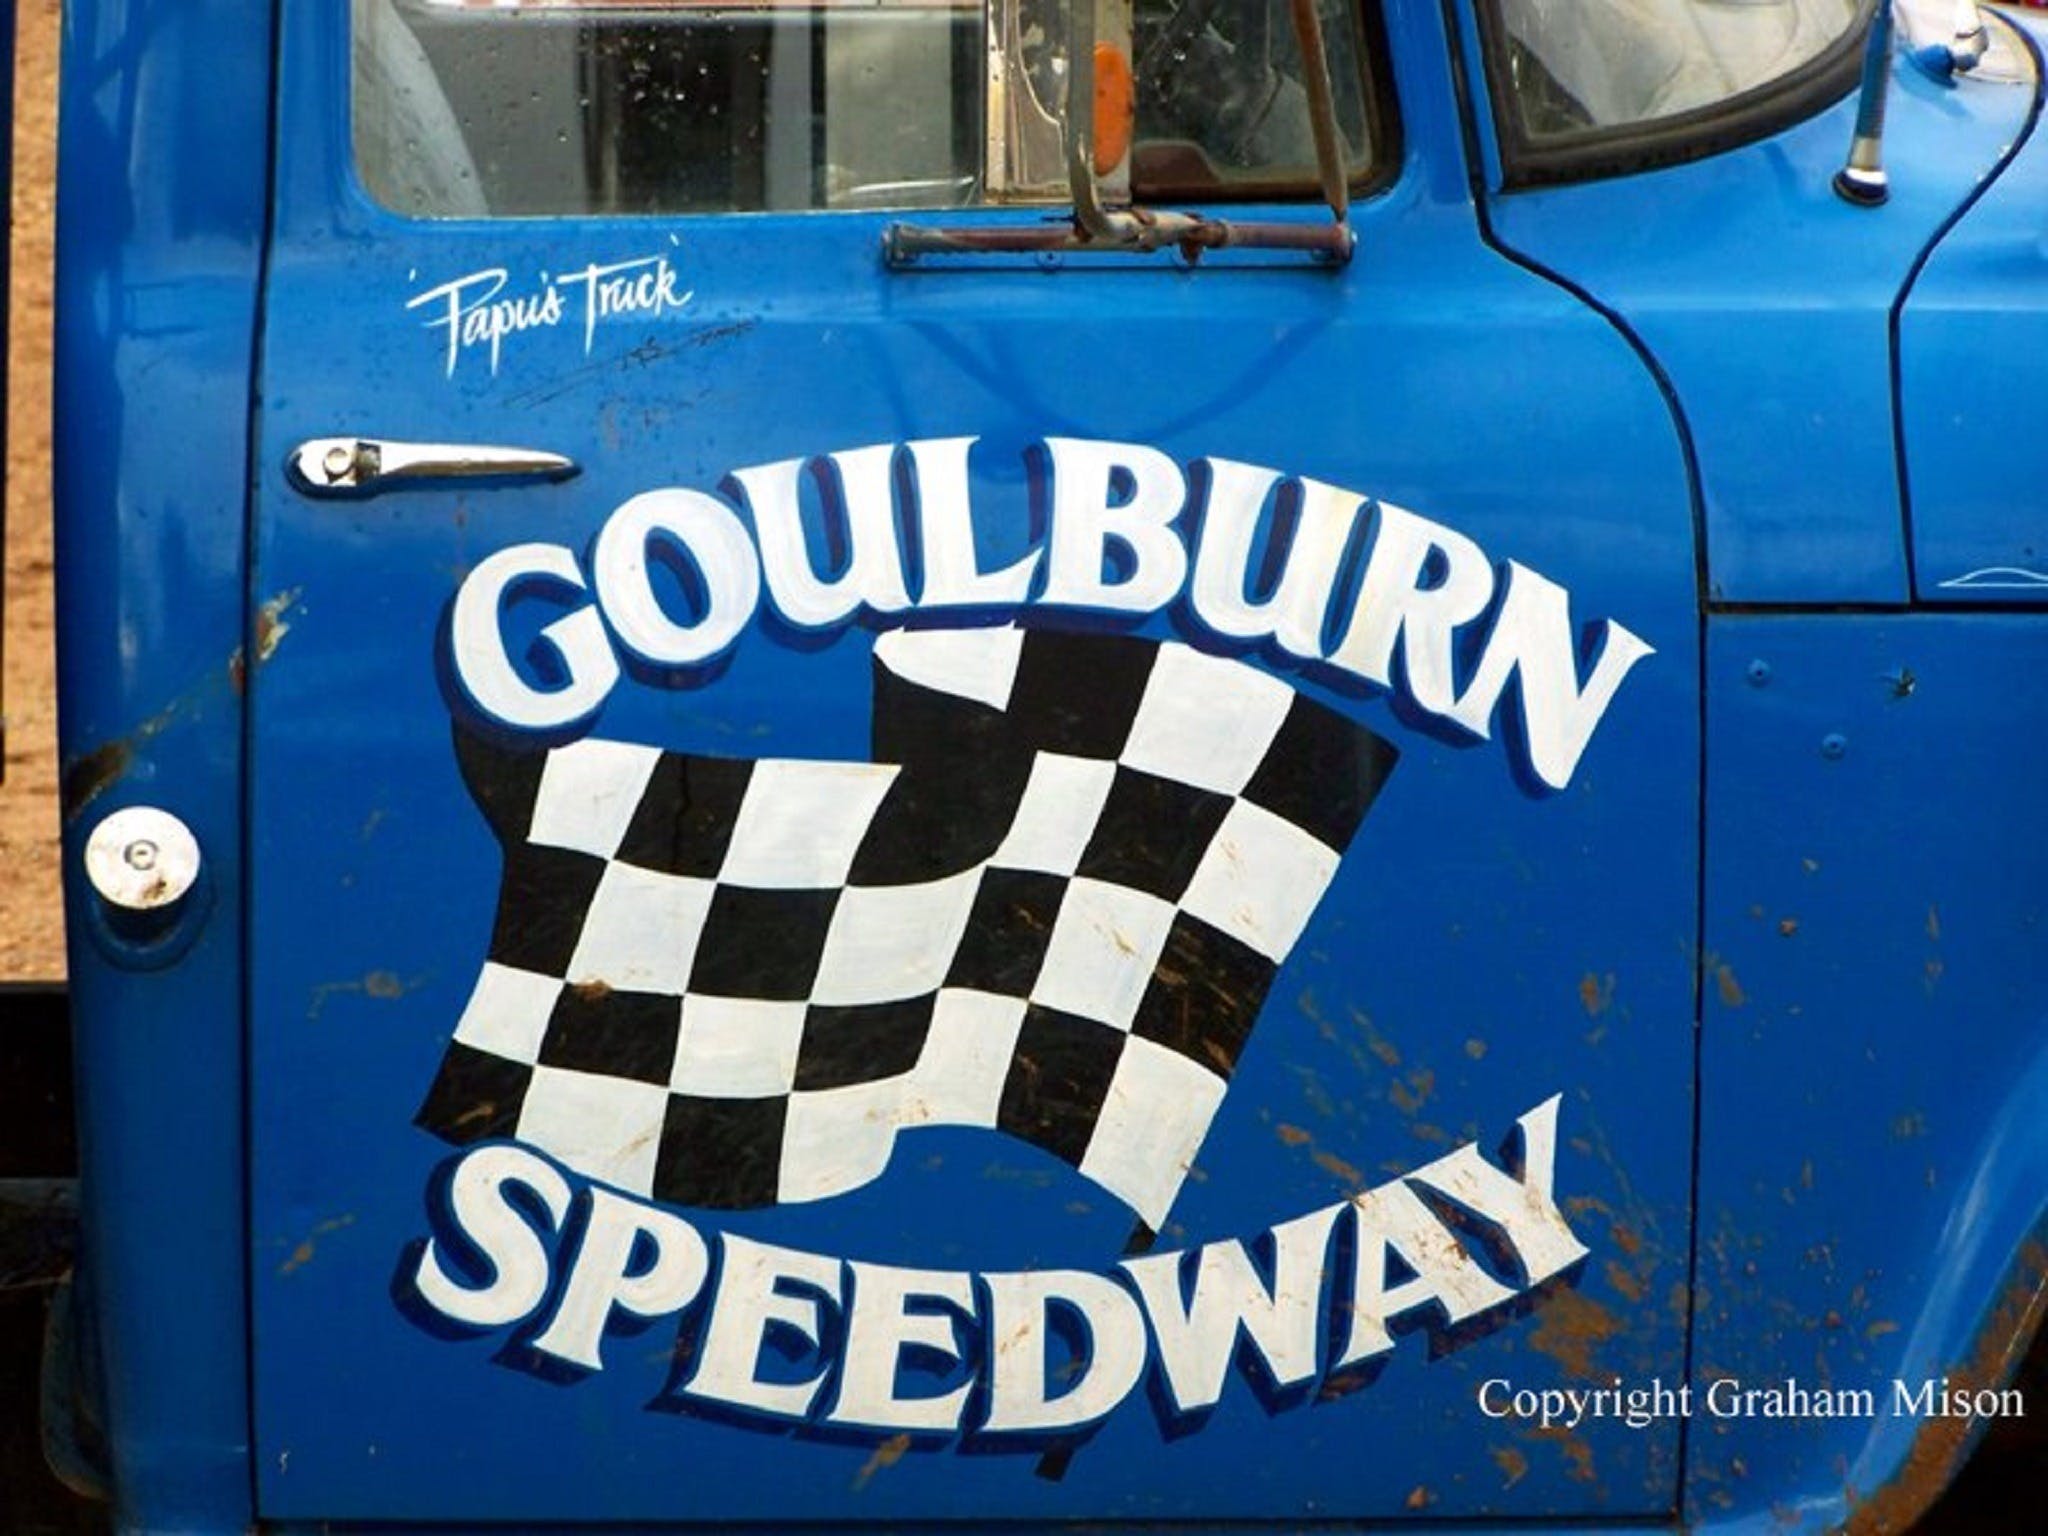 50 years of racing at Goulburn Speedway - Accommodation Bookings